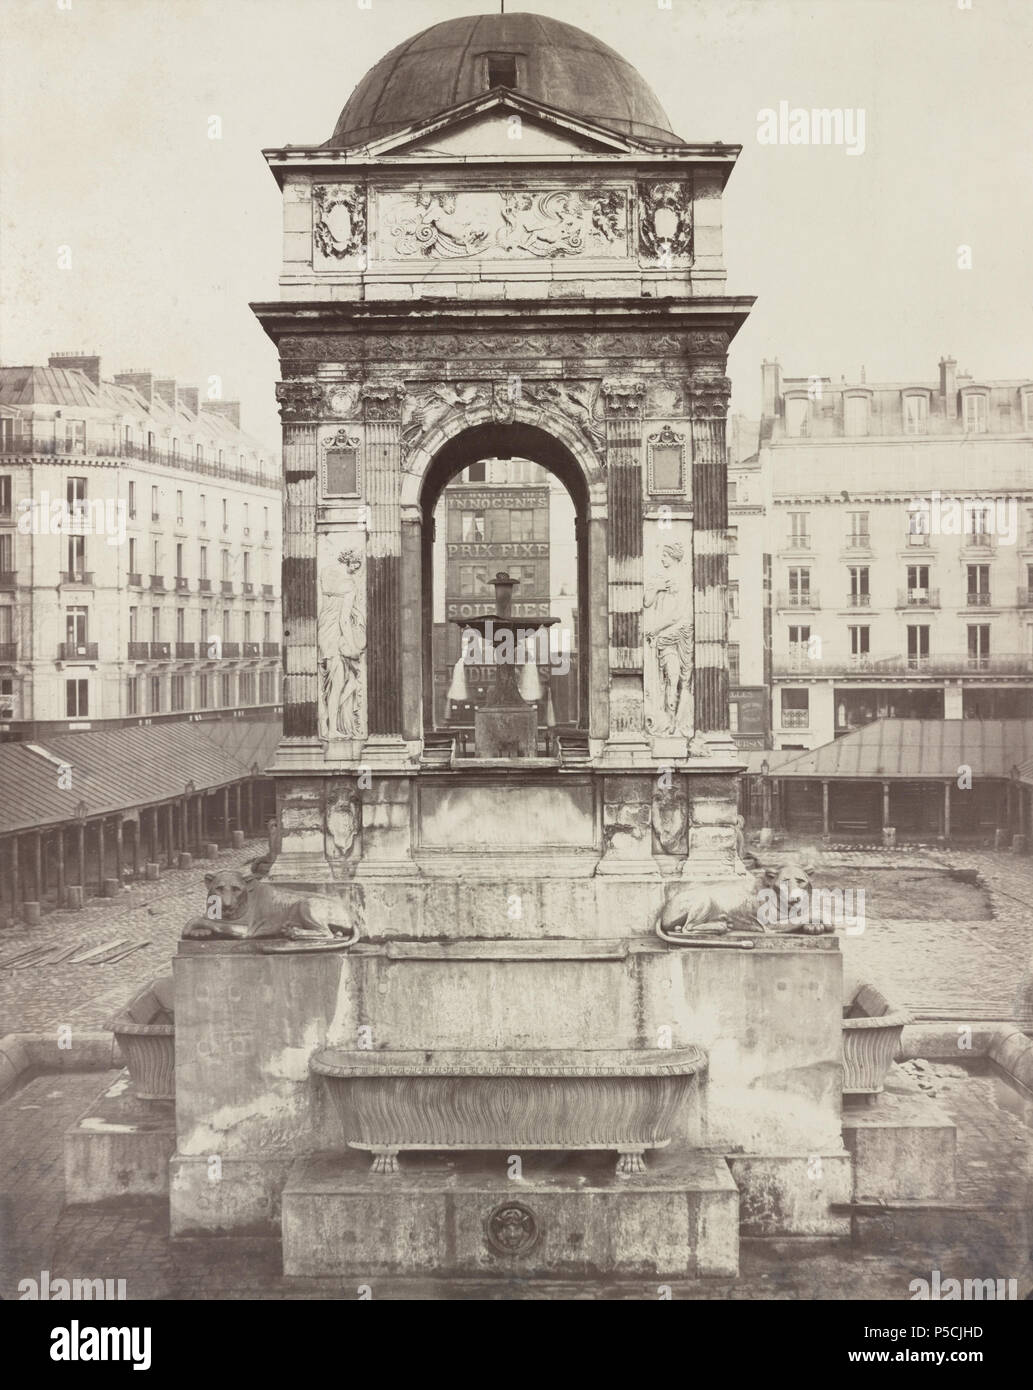 N/A. English: Fountain of the Innocents, Paris, France . circa 1858. Charles Marville 326 Charles Marville - Fountain of the Innocents, Paris, France Stock Photo